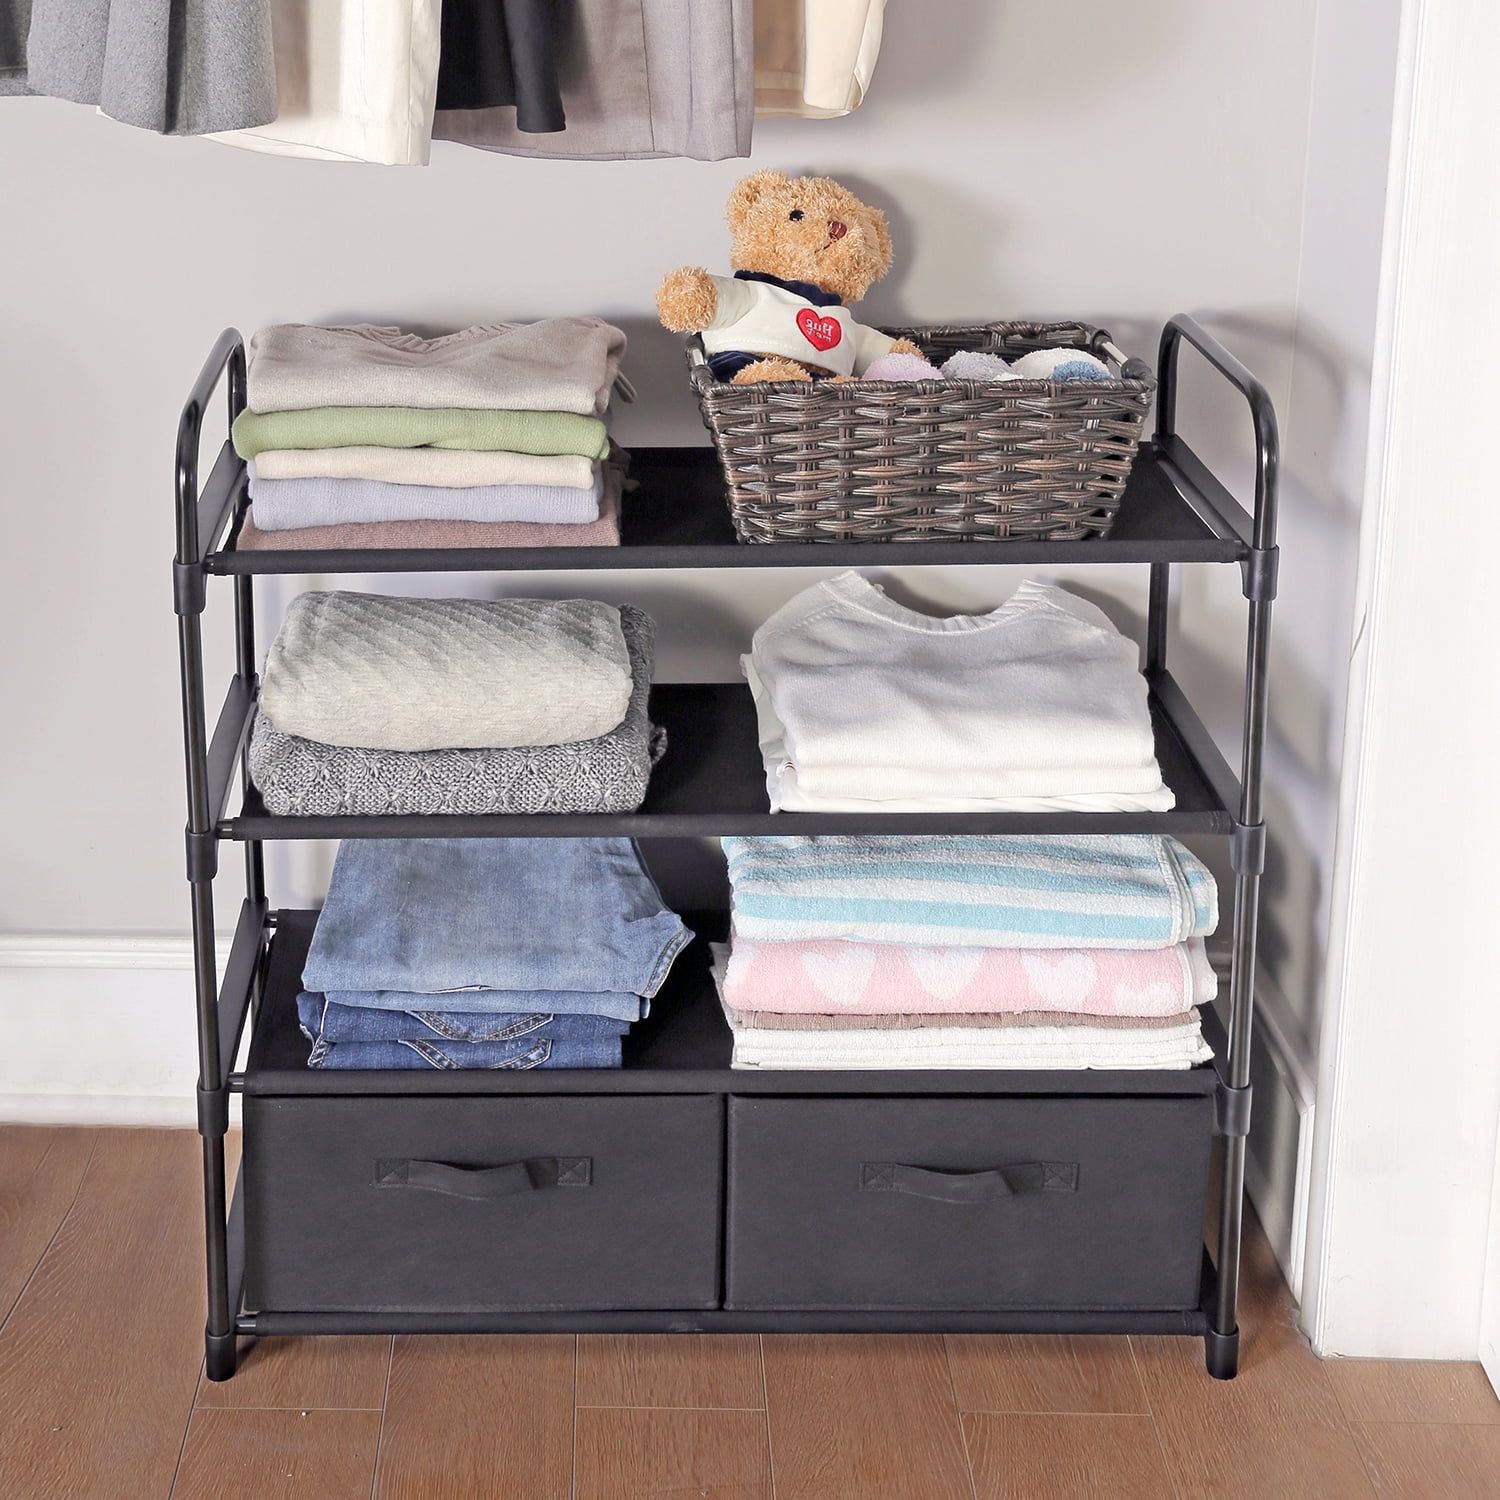 Mainstays 4 Shelf Home Closet Organizer With 2 Fabric Bins, Closet, Black,  Indoor, Adult And Child – Walmart For Wardrobes With 2 Bins (View 2 of 15)